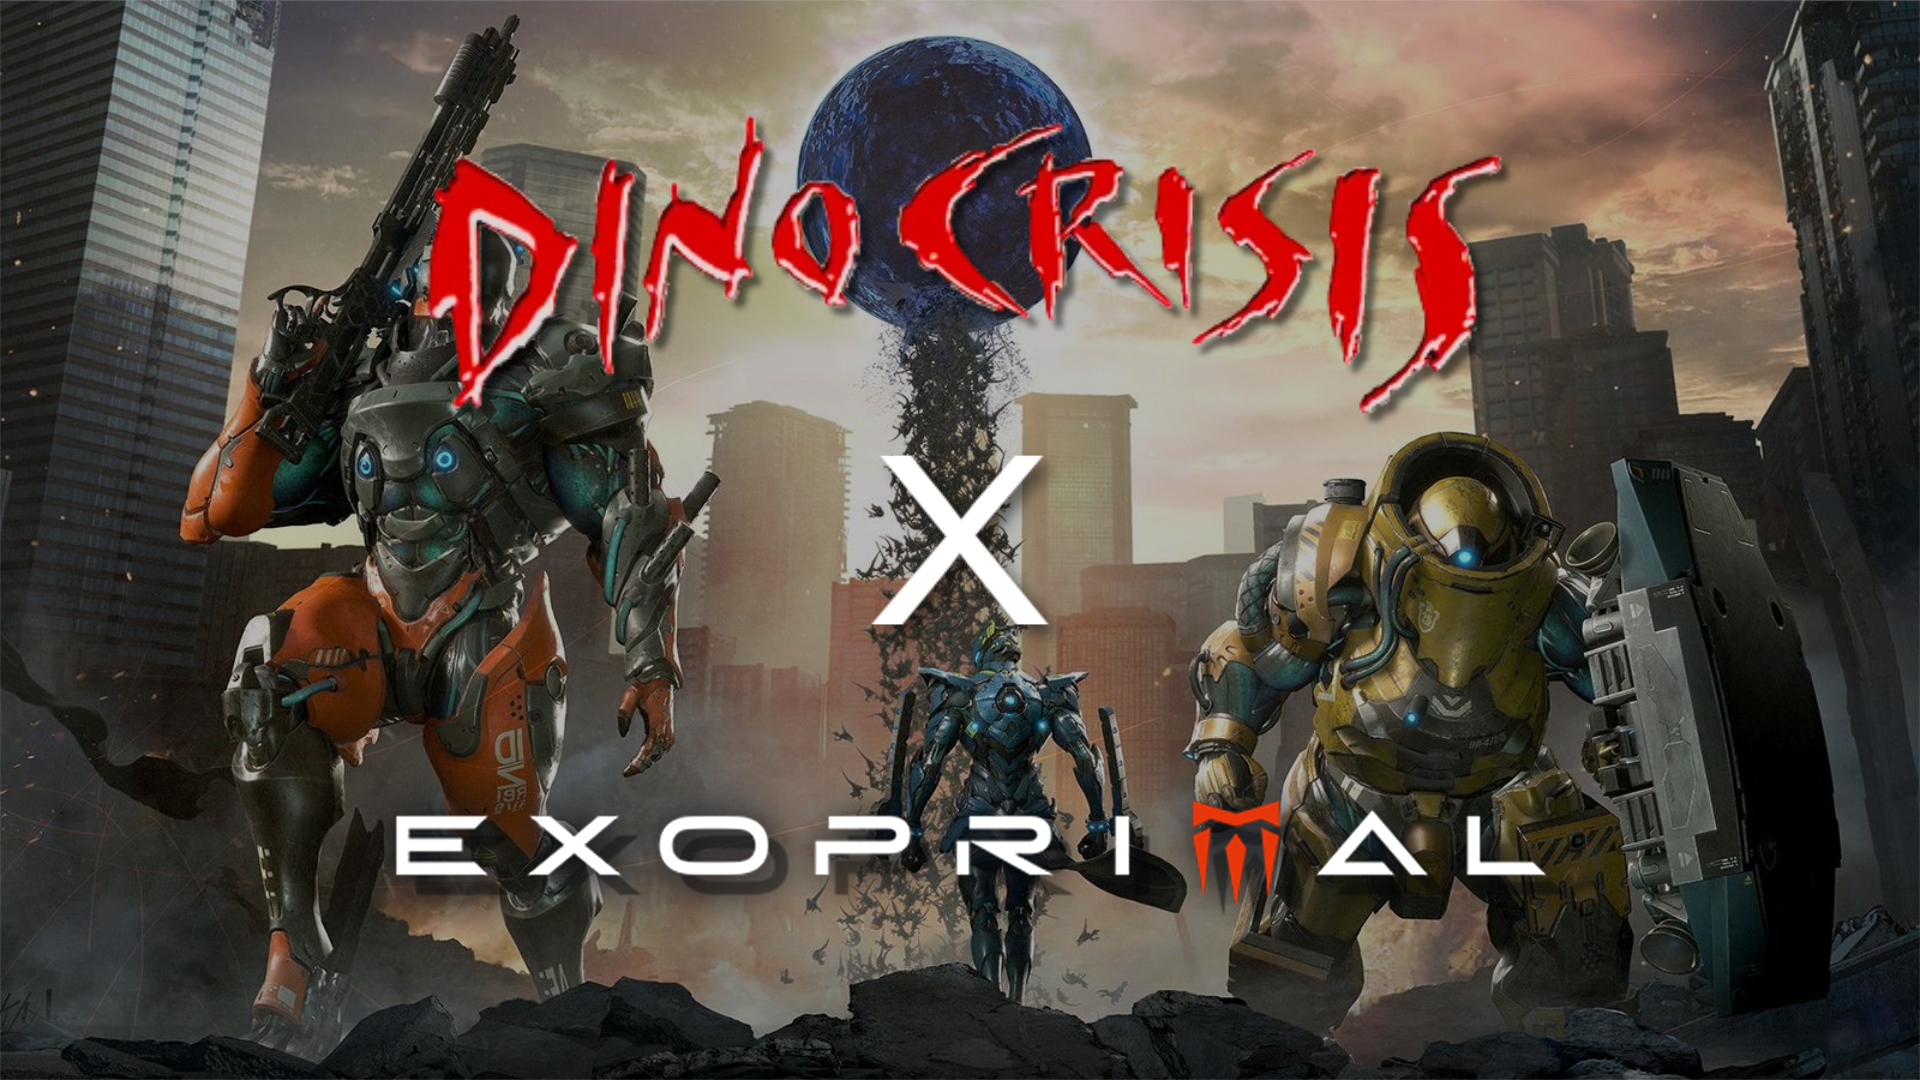 Exoprimal revealed by Capcom, a shooter with a dino crisis